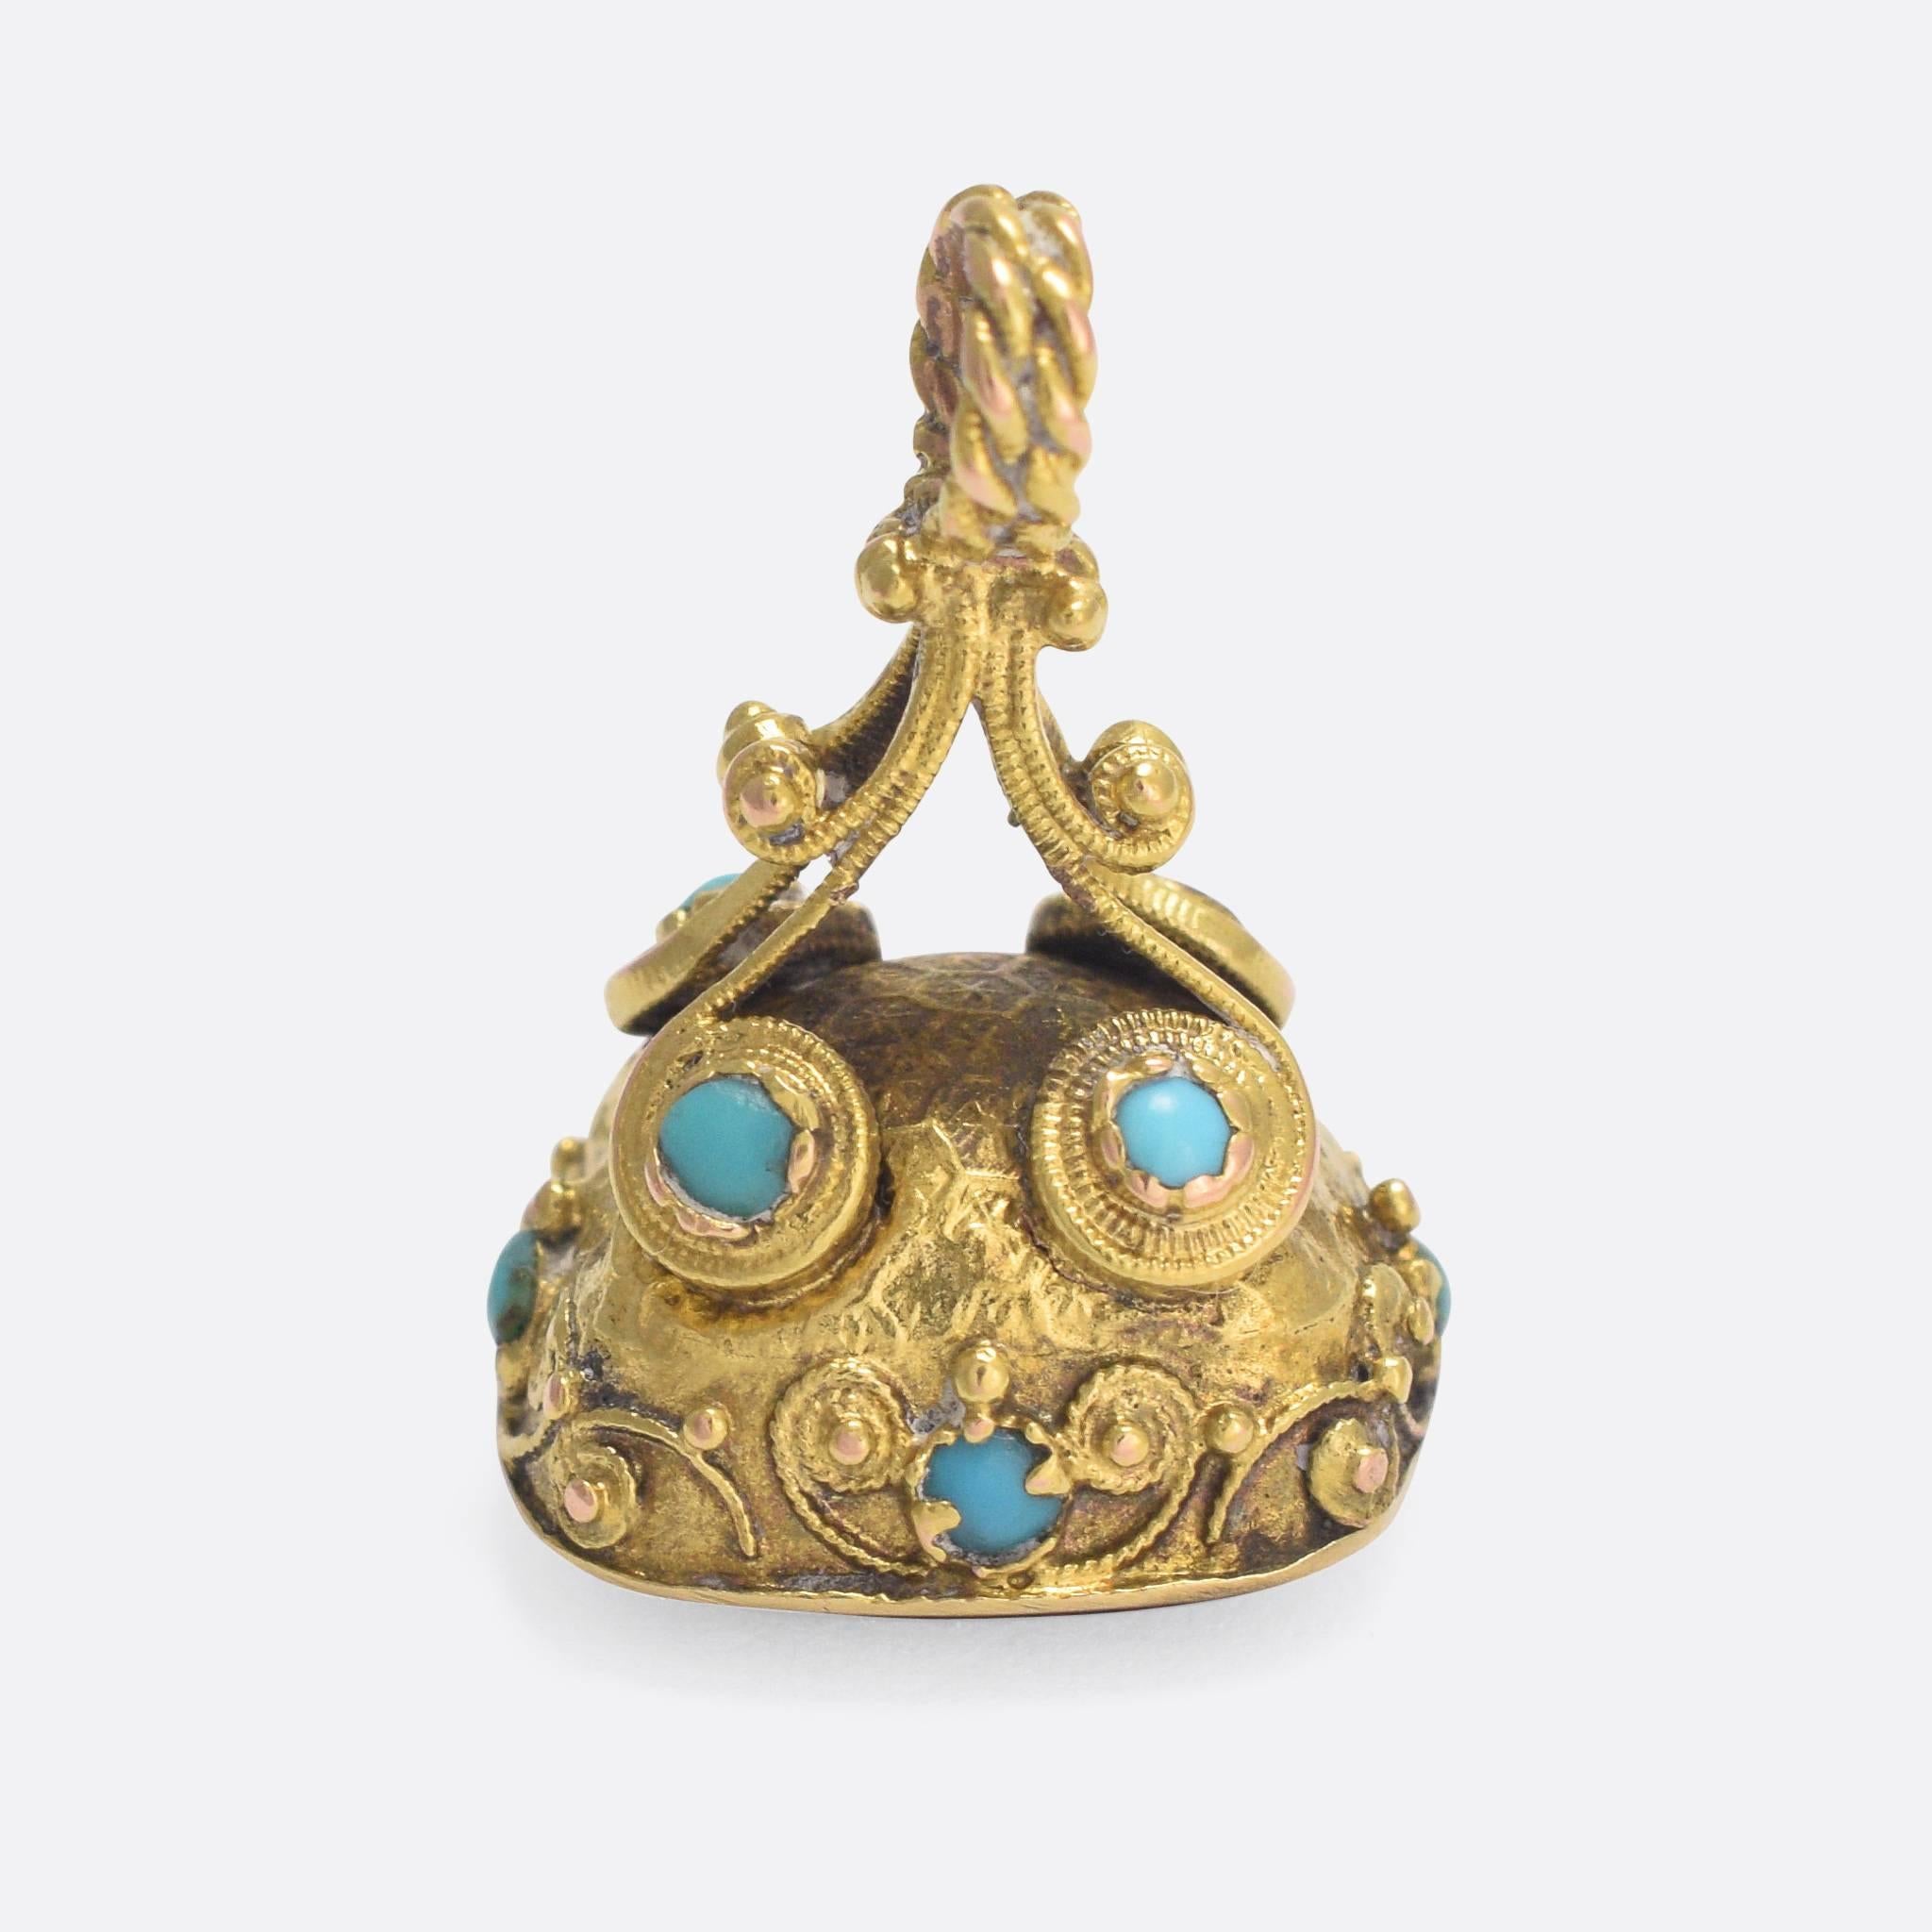 A beautiful antique seal fob dating to the early 19th Century. Featuring exceptionally intricate Cantille goldwork, the piece is set with small turquoise cabochons and an uncarved bloodstone panel. The frame comprises fine beaded ropework, while the